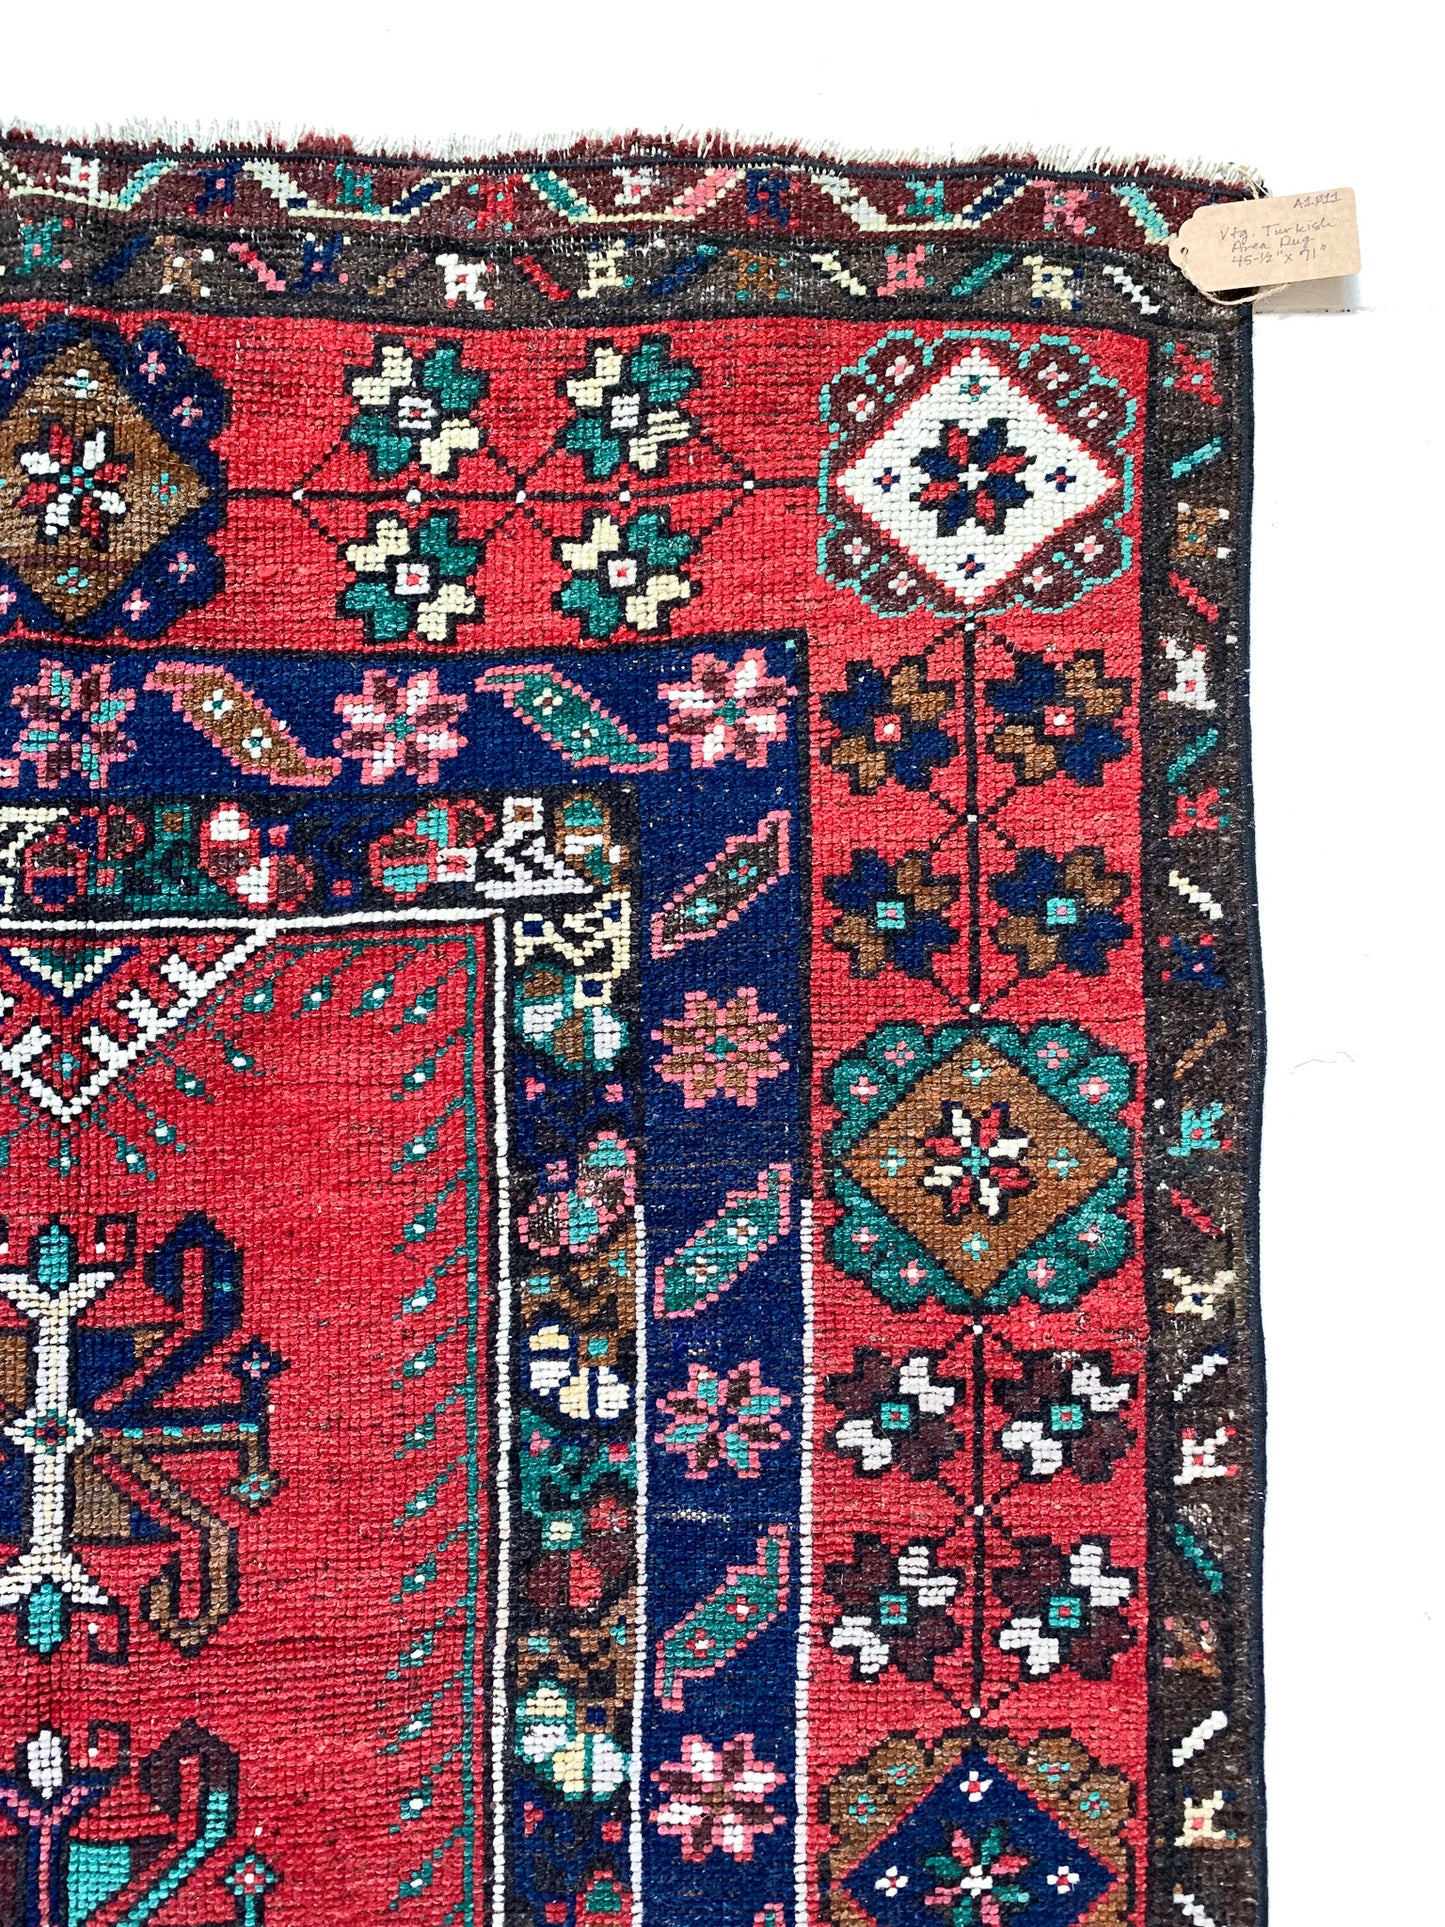 Reserved for Lynda - No. A1011 - 3.8' x 5.9' Vintage Turkish Anatolian Area Rug